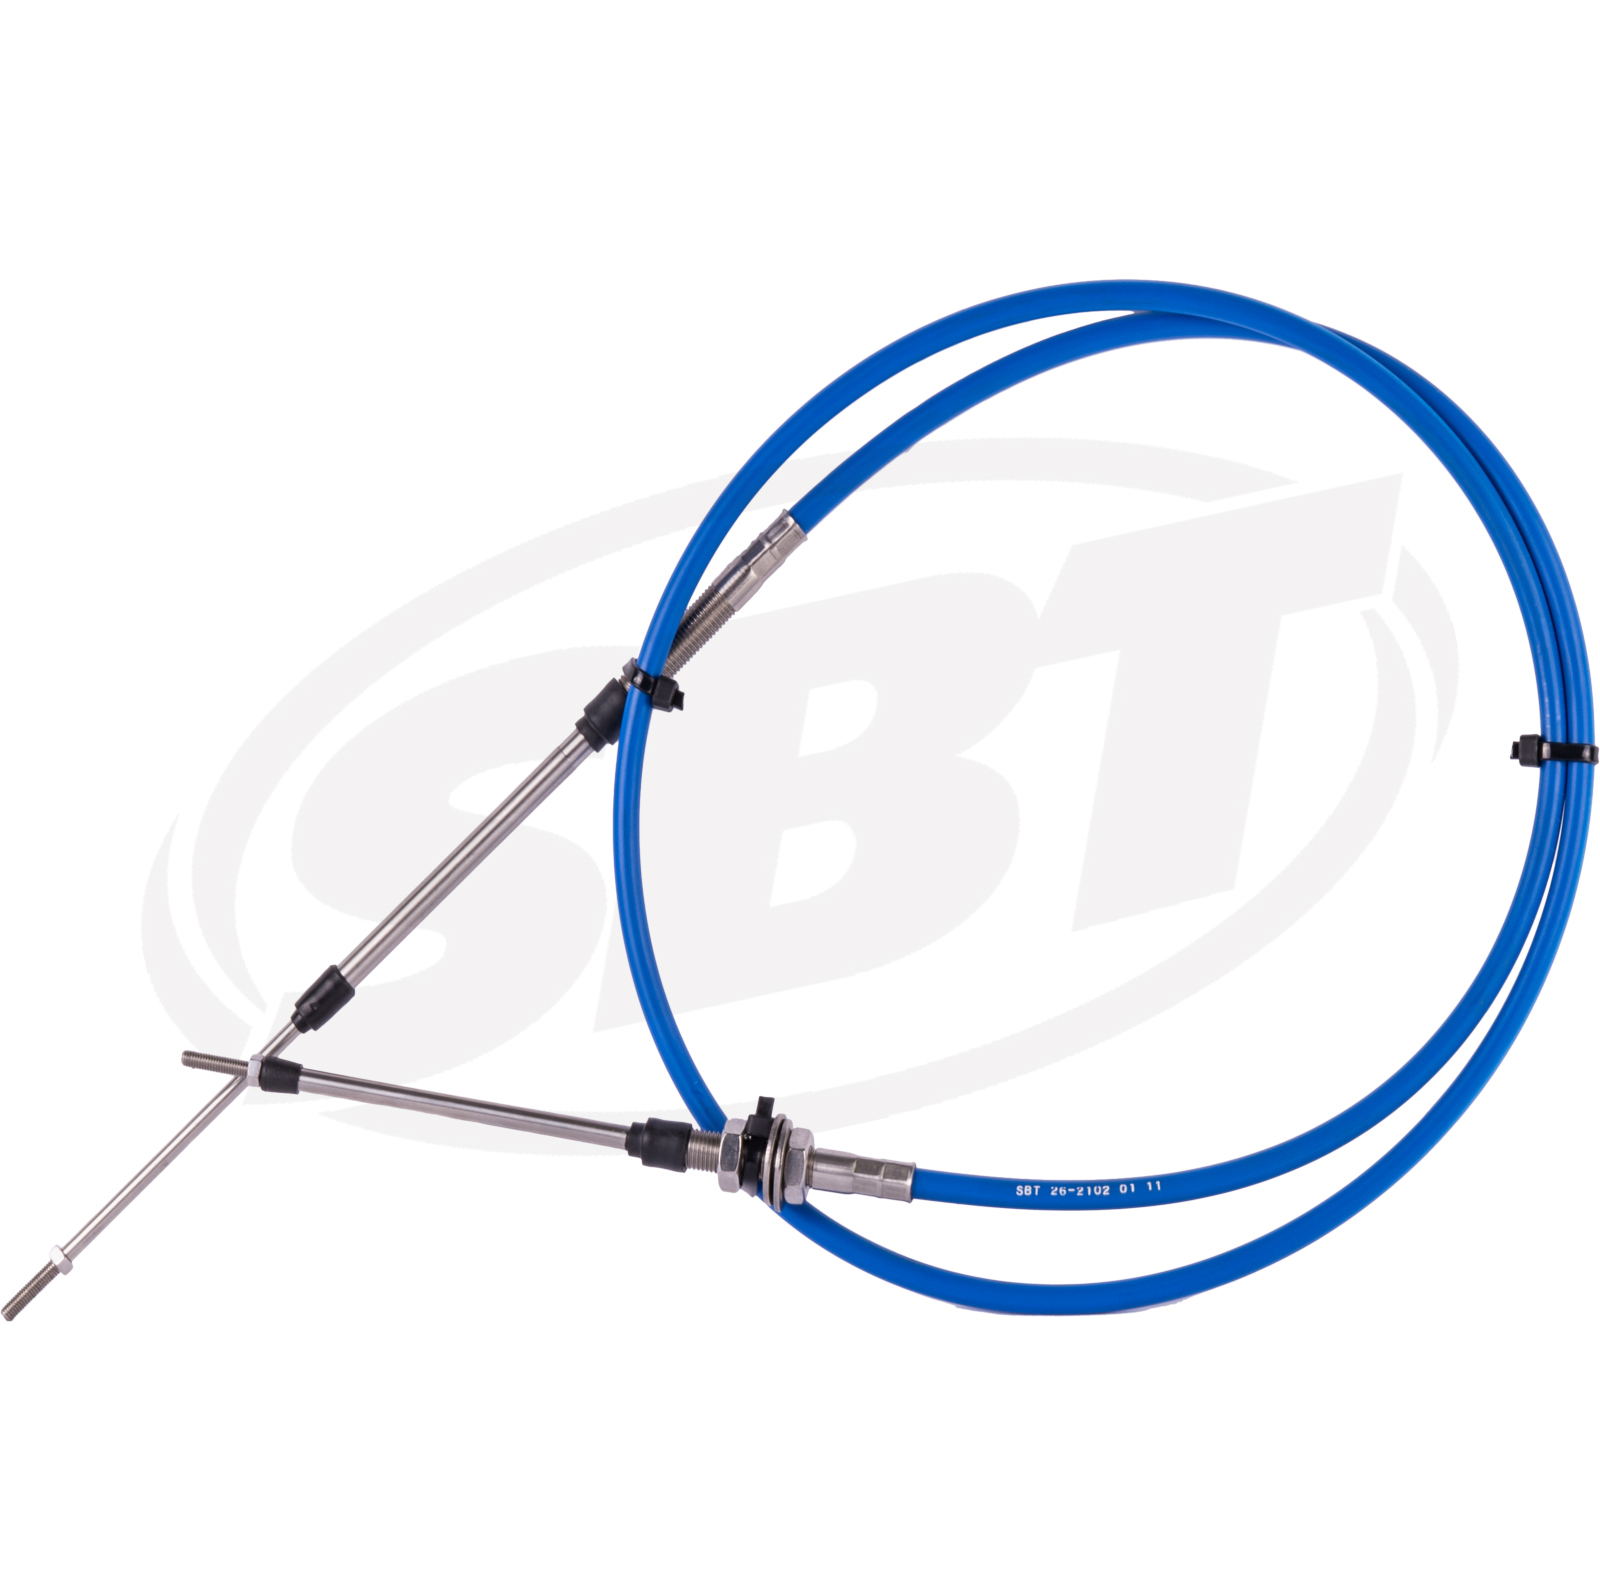 SeaDoo GT/GTS/GTX/SP/XP Reverse Steering Cable Jet Ski Replaces 277000228